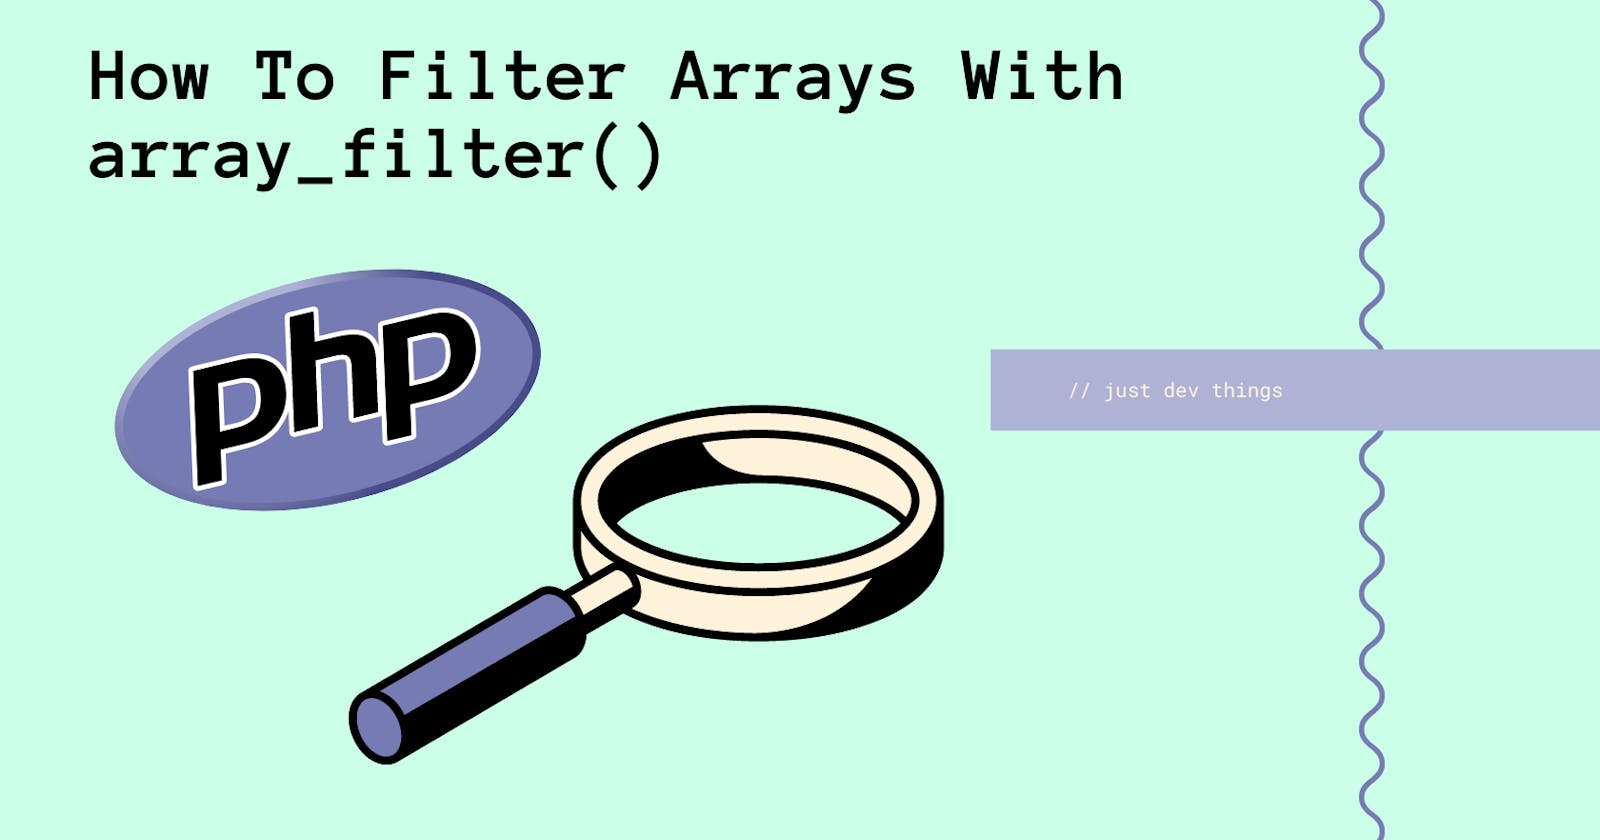 How Does array_filter() Work In PHP?